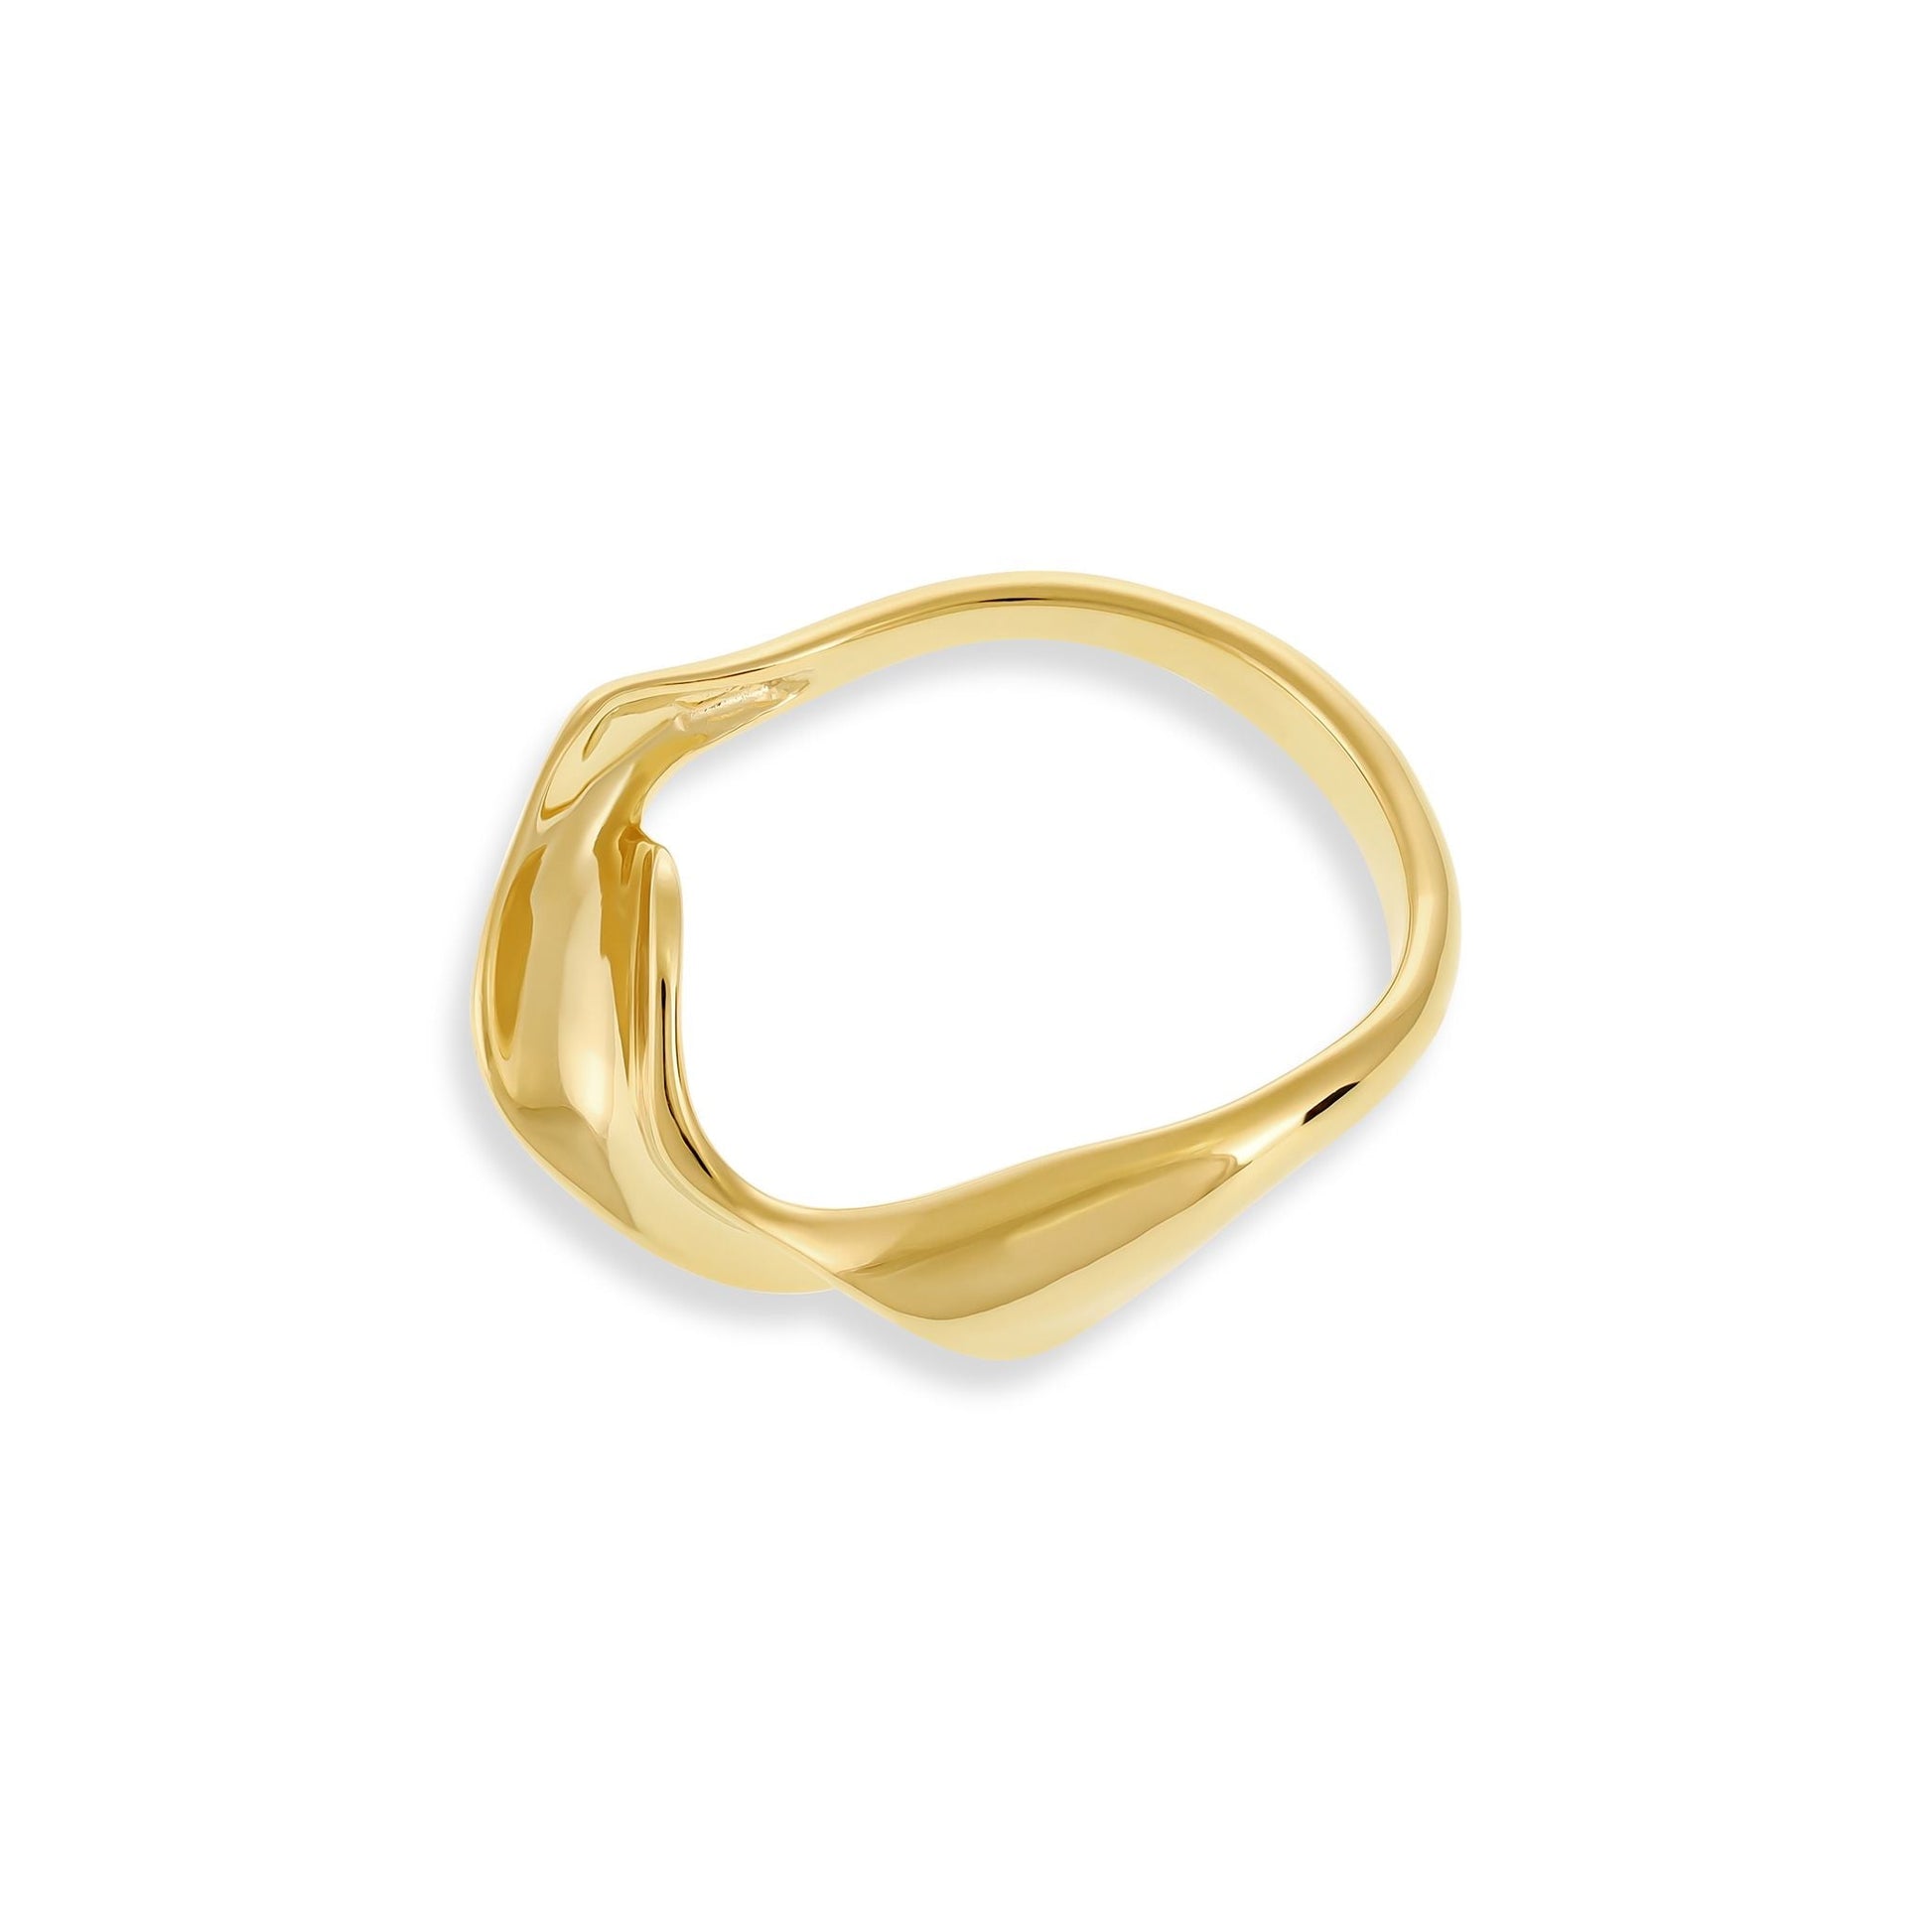 18ct 1 micron gold plated twisted silver ring PRN3005 - FJewellery